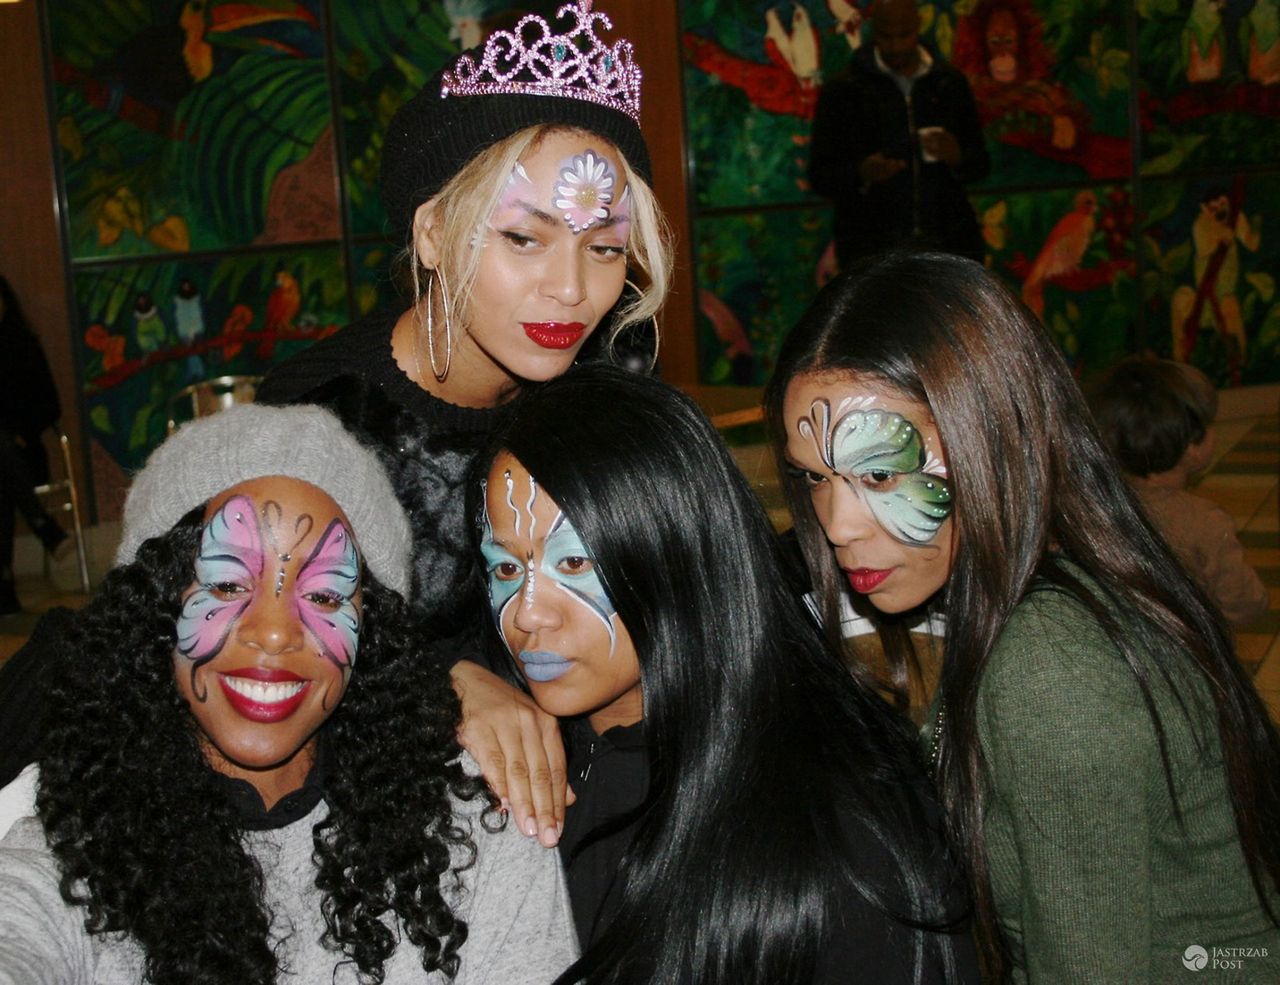 16 JAN 2014

BEYONCE POSTED THESE PICS OF HER AND HUSBAND JAY Z CELEBRATING THEIR DAUGHTER BLUE IVY'S SECOND BIRTHDAY WITH AN ELABORATE PARTY INCLUDING EXOTIC ANIMALS AND FACE PAINTING! 

BYLINE MUST READ : SUPPLIED BY XPOSUREPHOTOS.COM

*XPOSURE PHOTOS DOES NOT CLAIM ANY COPYRIGHT OR LICENSE IN THE ATTACHED MATERIAL. ANY DOWNLOADING FEES CHARGED BY XPOSURE ARE FOR XPOSURE'S SERVICES ONLY, AND DO NOT, NOR ARE THEY INTENDED TO, CONVEY TO THE USER ANY COPYRIGHT OR LICENSE IN THE MATERIAL. BY PUBLISHING THIS MATERIAL , THE USER EXPRESSLY AGREES TO INDEMNIFY AND TO HOLD XPOSURE HARMLESS FROM ANY CLAIMS, DEMANDS, OR CAUSES OF ACTION ARISING OUT OF OR CONNECTED IN ANY WAY WITH USER'S PUBLICATION OF THE MATERIAL*


*UK CLIENTS MUST CALL PRIOR TO TV OR ONLINE USAGE PLEASE TELEPHONE020 8370 0291 & +1 310 562 7073*